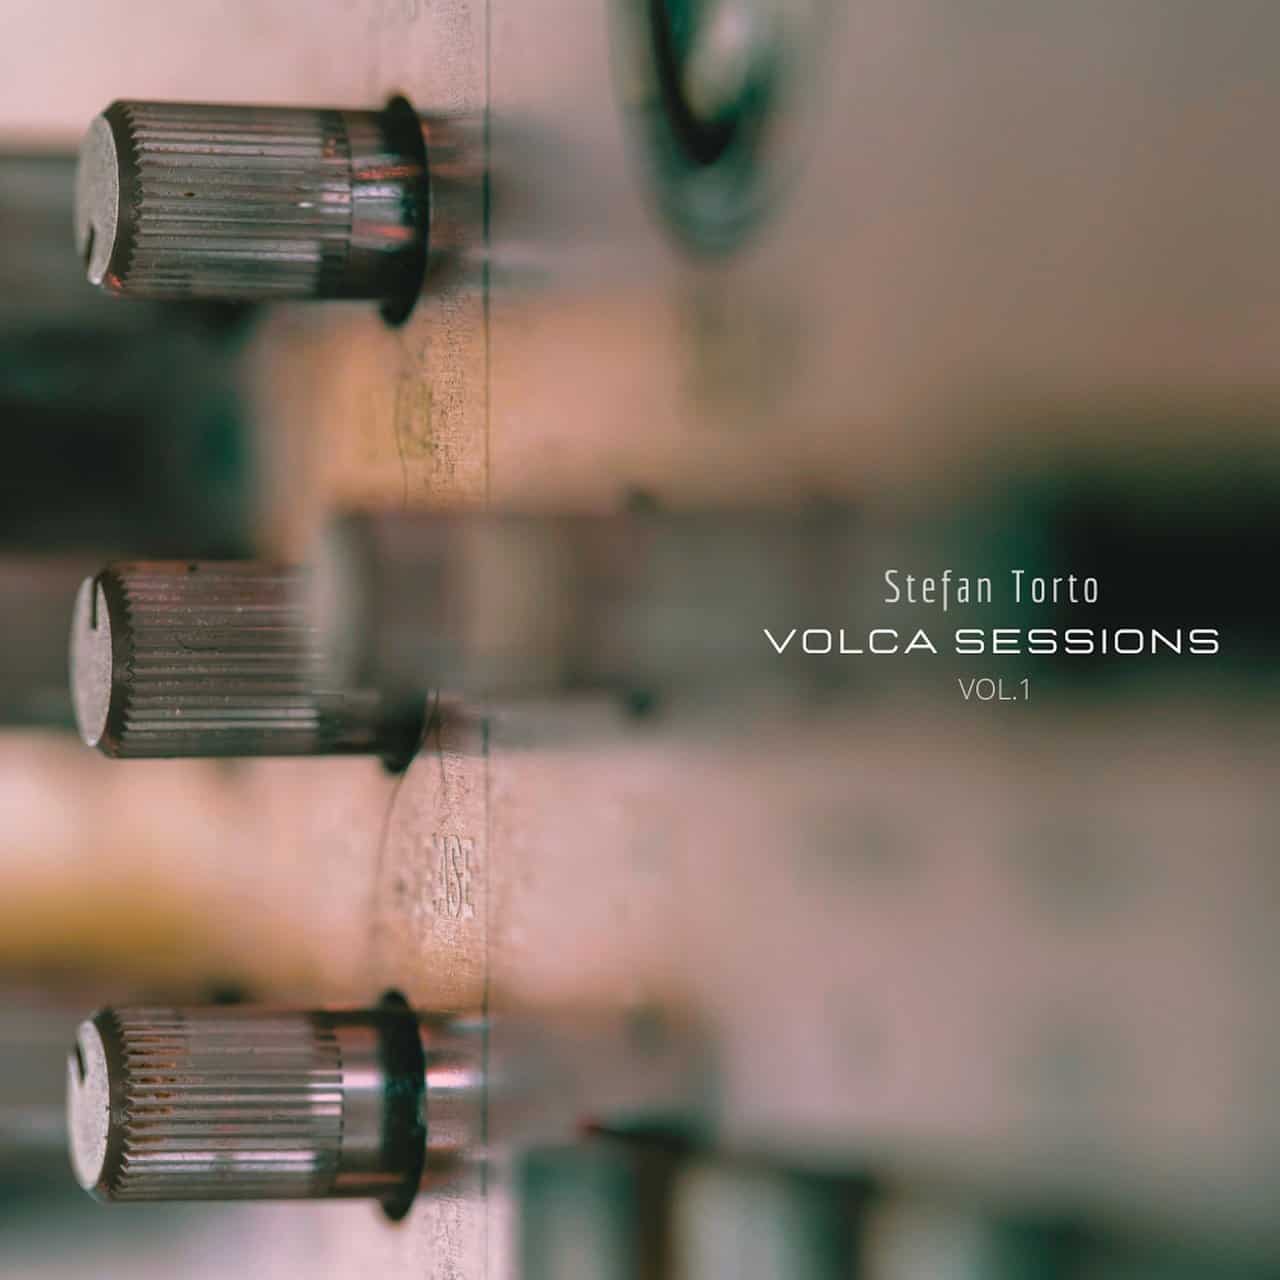 Download Volca Sessions Vol.1 on Electrobuzz